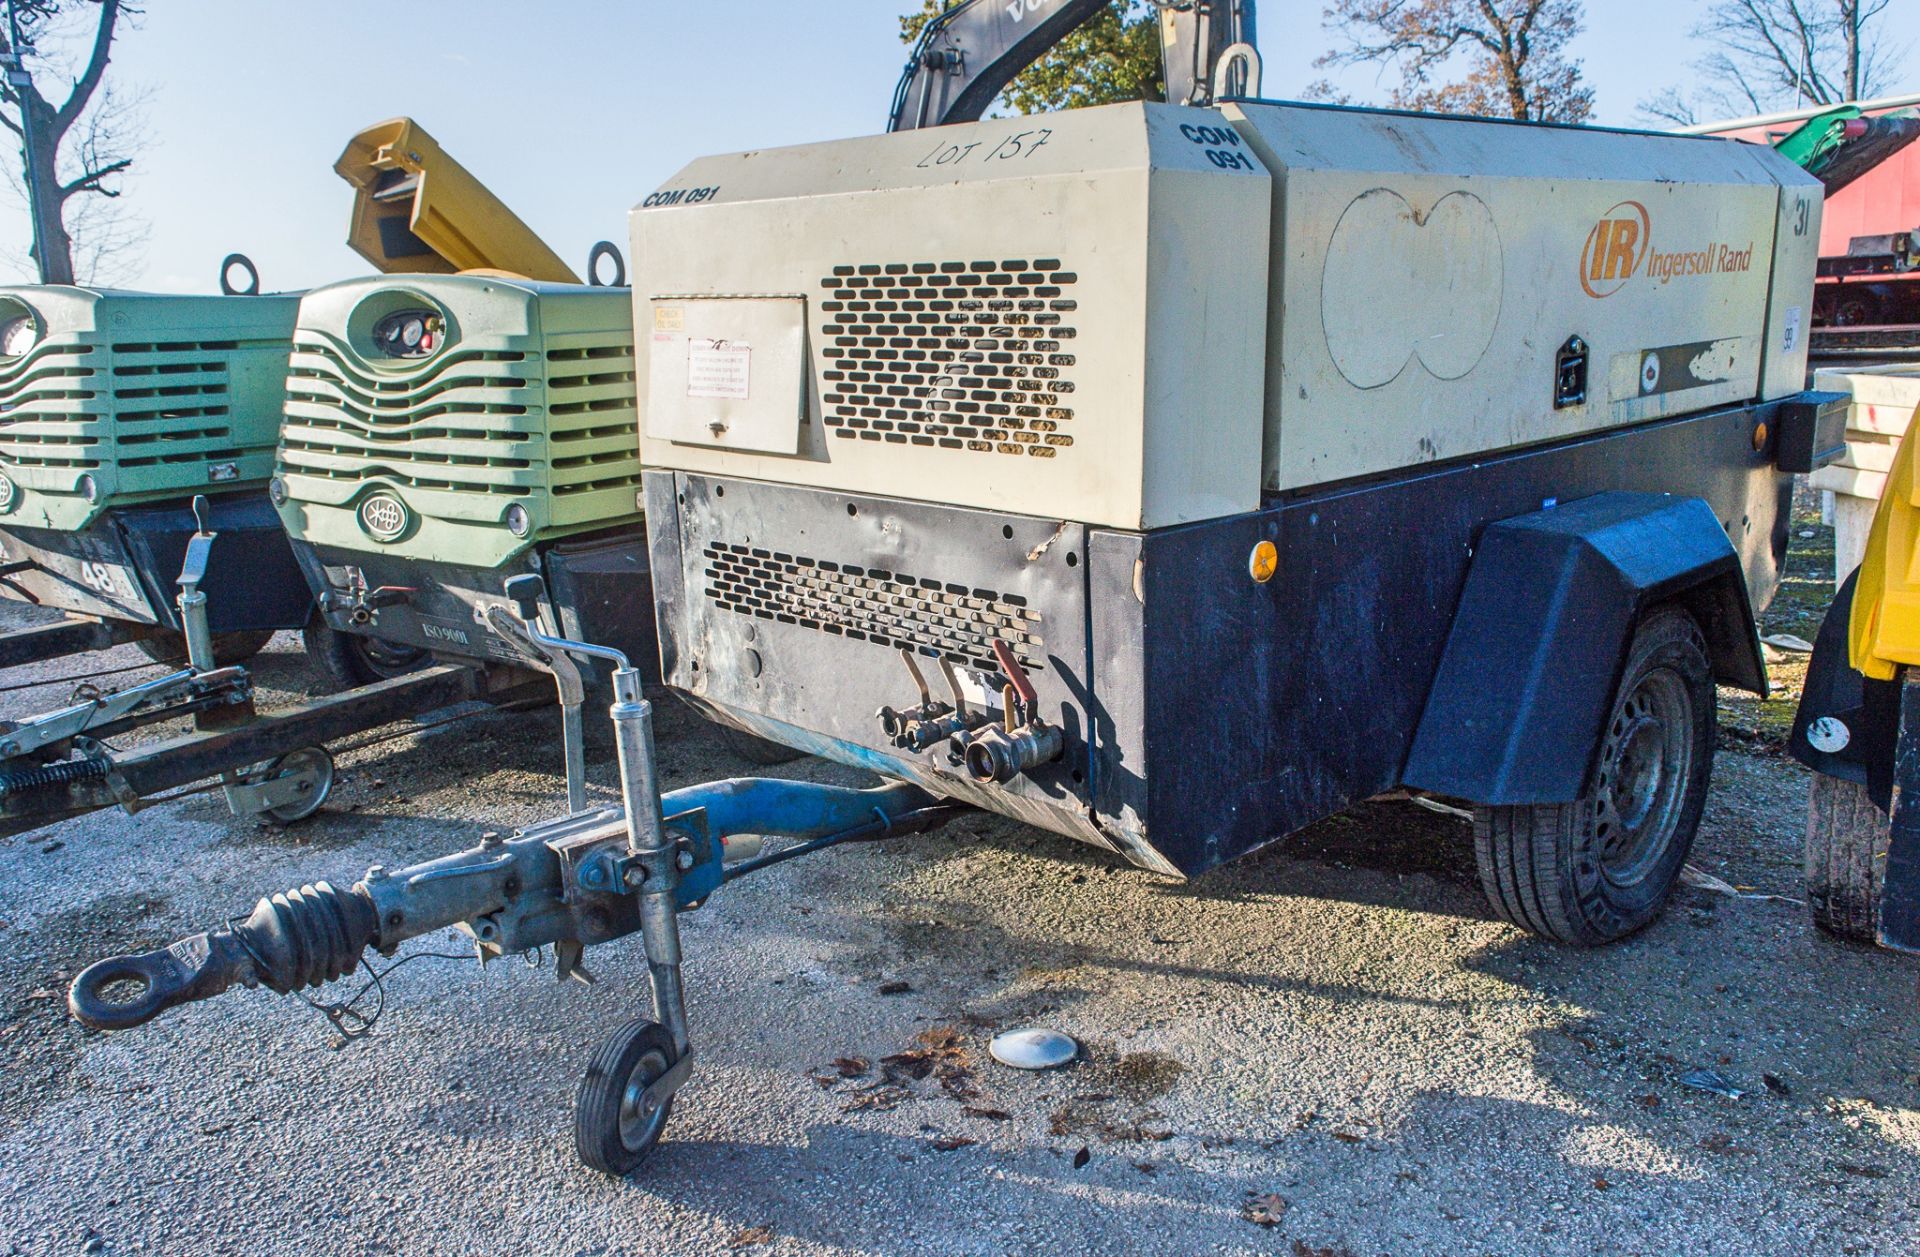 Ingersoll Rand 7/71 diesel driven mobile air compressor Year: 2007 S/N: 621798 Recorded Hours: